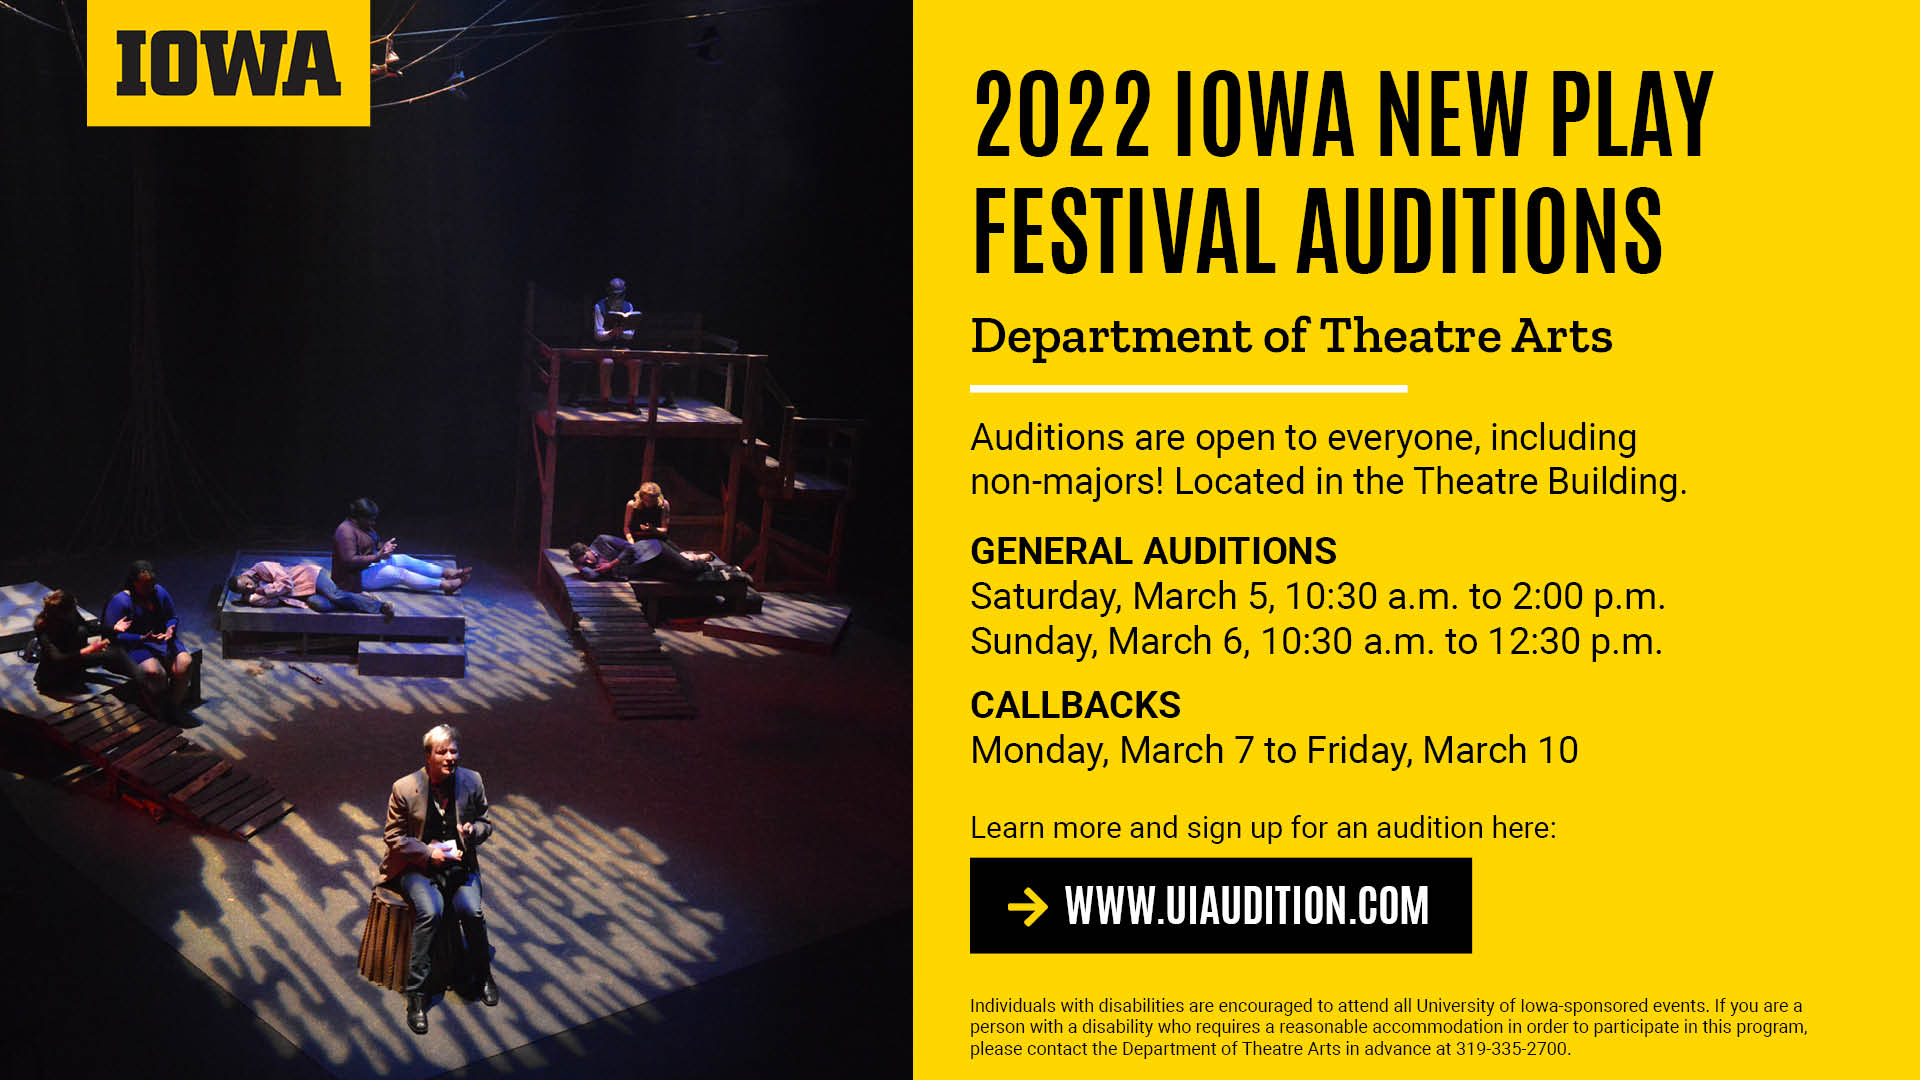 2022 Iowa New Play Festival Auditions Department of Theatre Arts Auditions are open to everyone, including non-majors! Located in the Theatre Building. General auditions Saturday, march 5 10:30 a.m. - 2 p.m. Sunday, March 6 10:30 a.m. - 12:30 p.m. Callbacks Monday, March 7 - Friday, March 10. Learn more and sign up: www.uiaudition.com